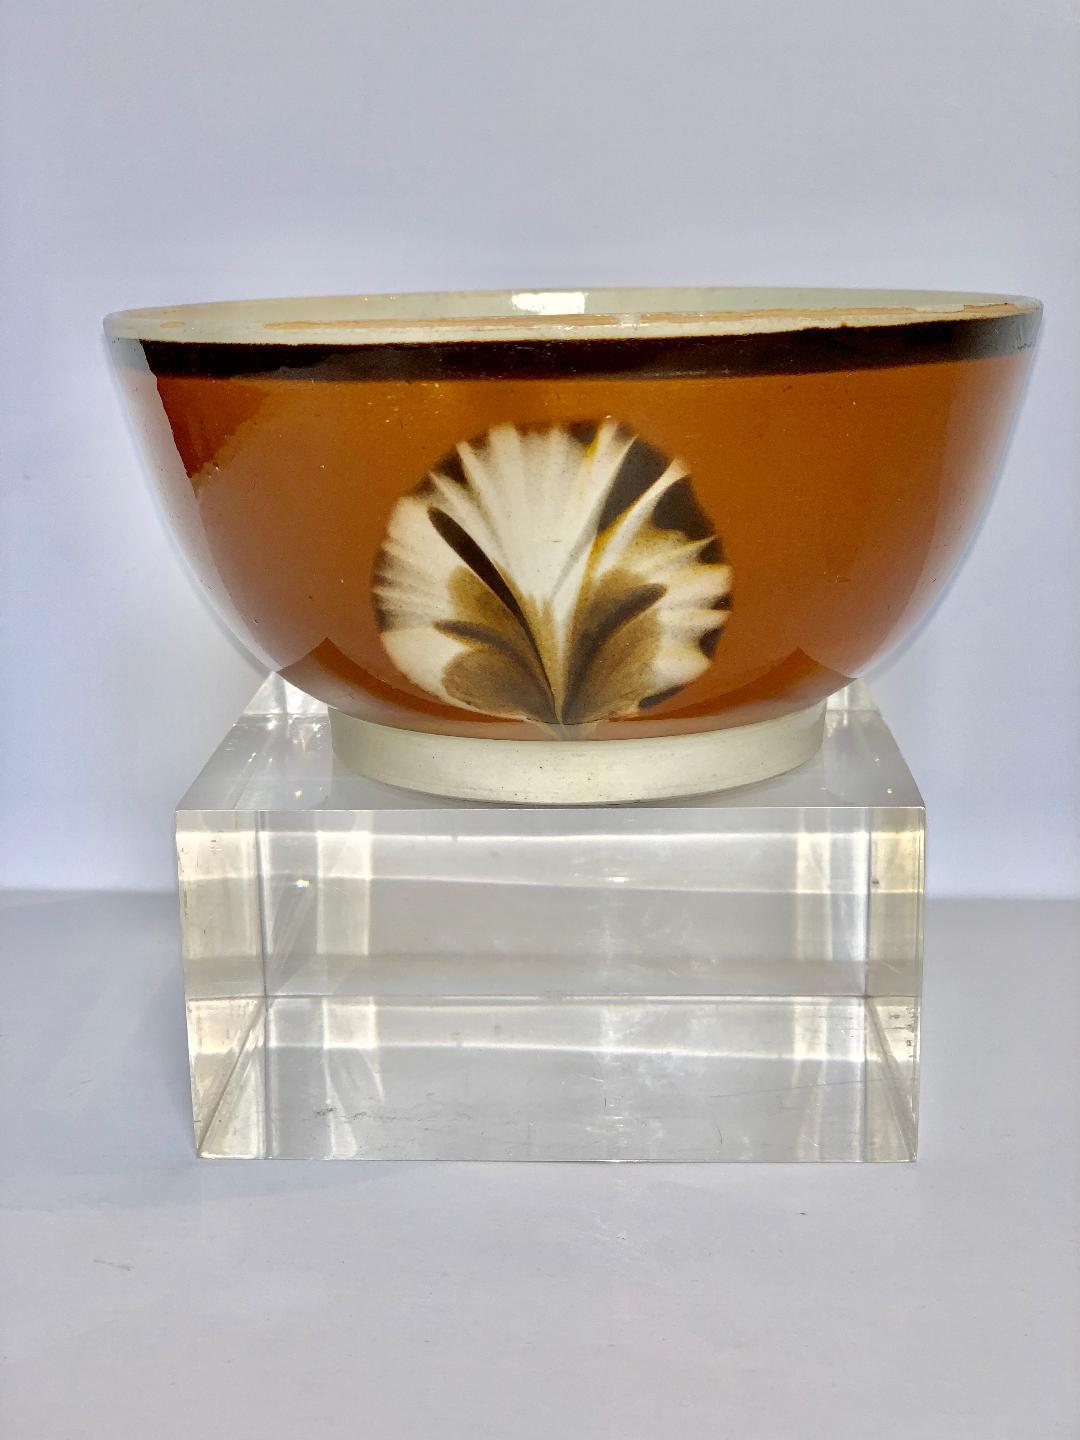 Glazed Mochaware Bowl with Dipped Fan Decoration Made in England, circa 1800